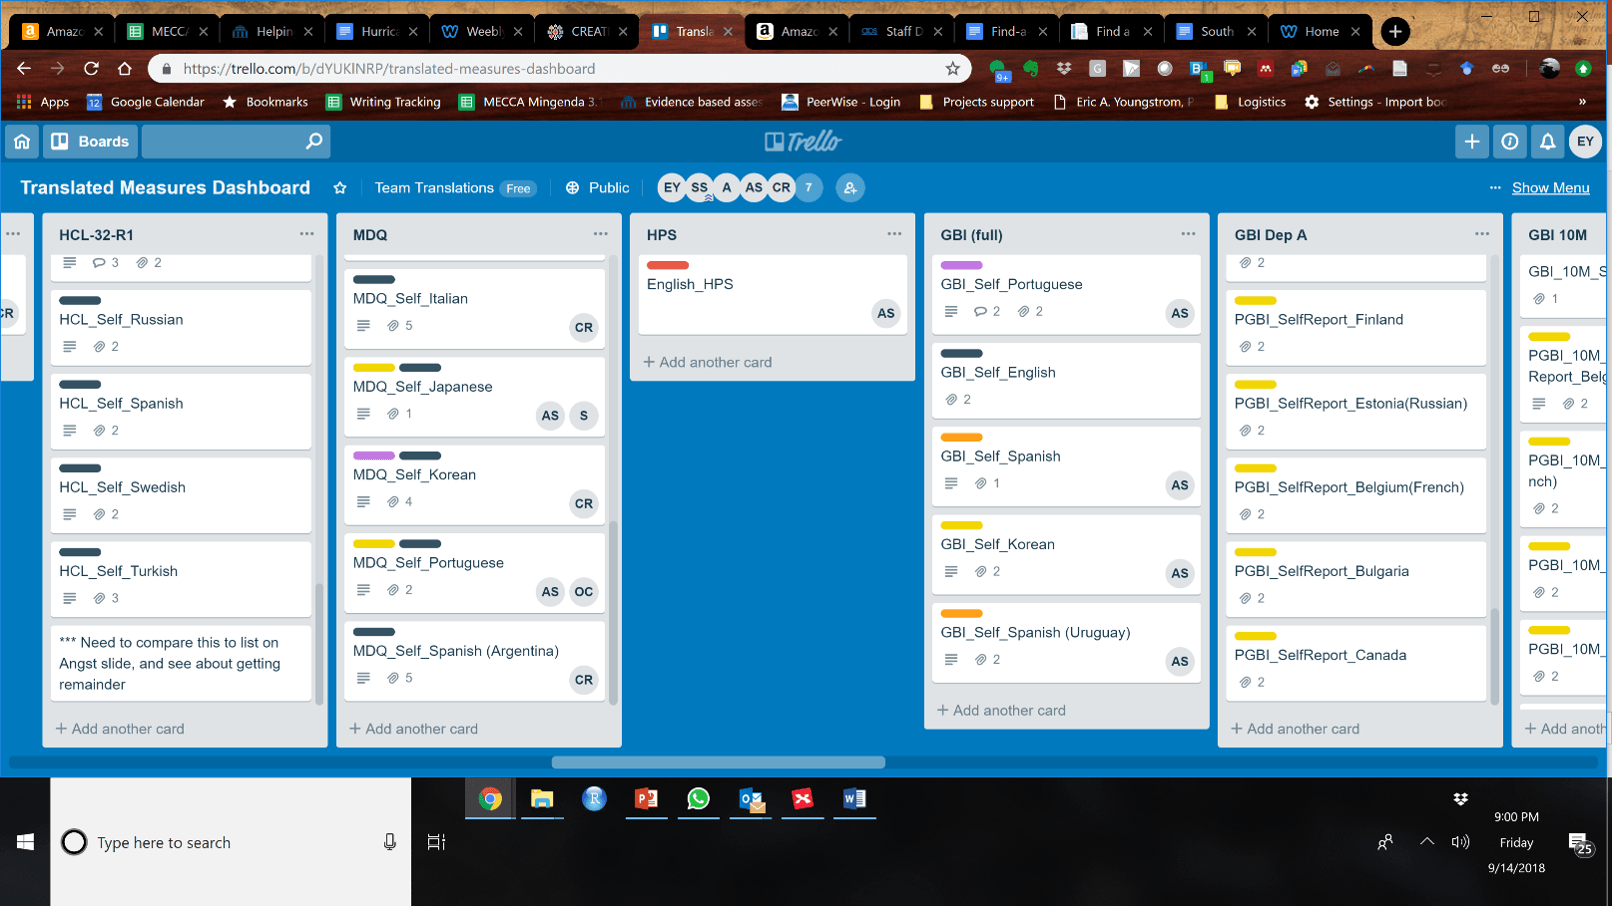 Trello dashboard showing cards with different colored bars